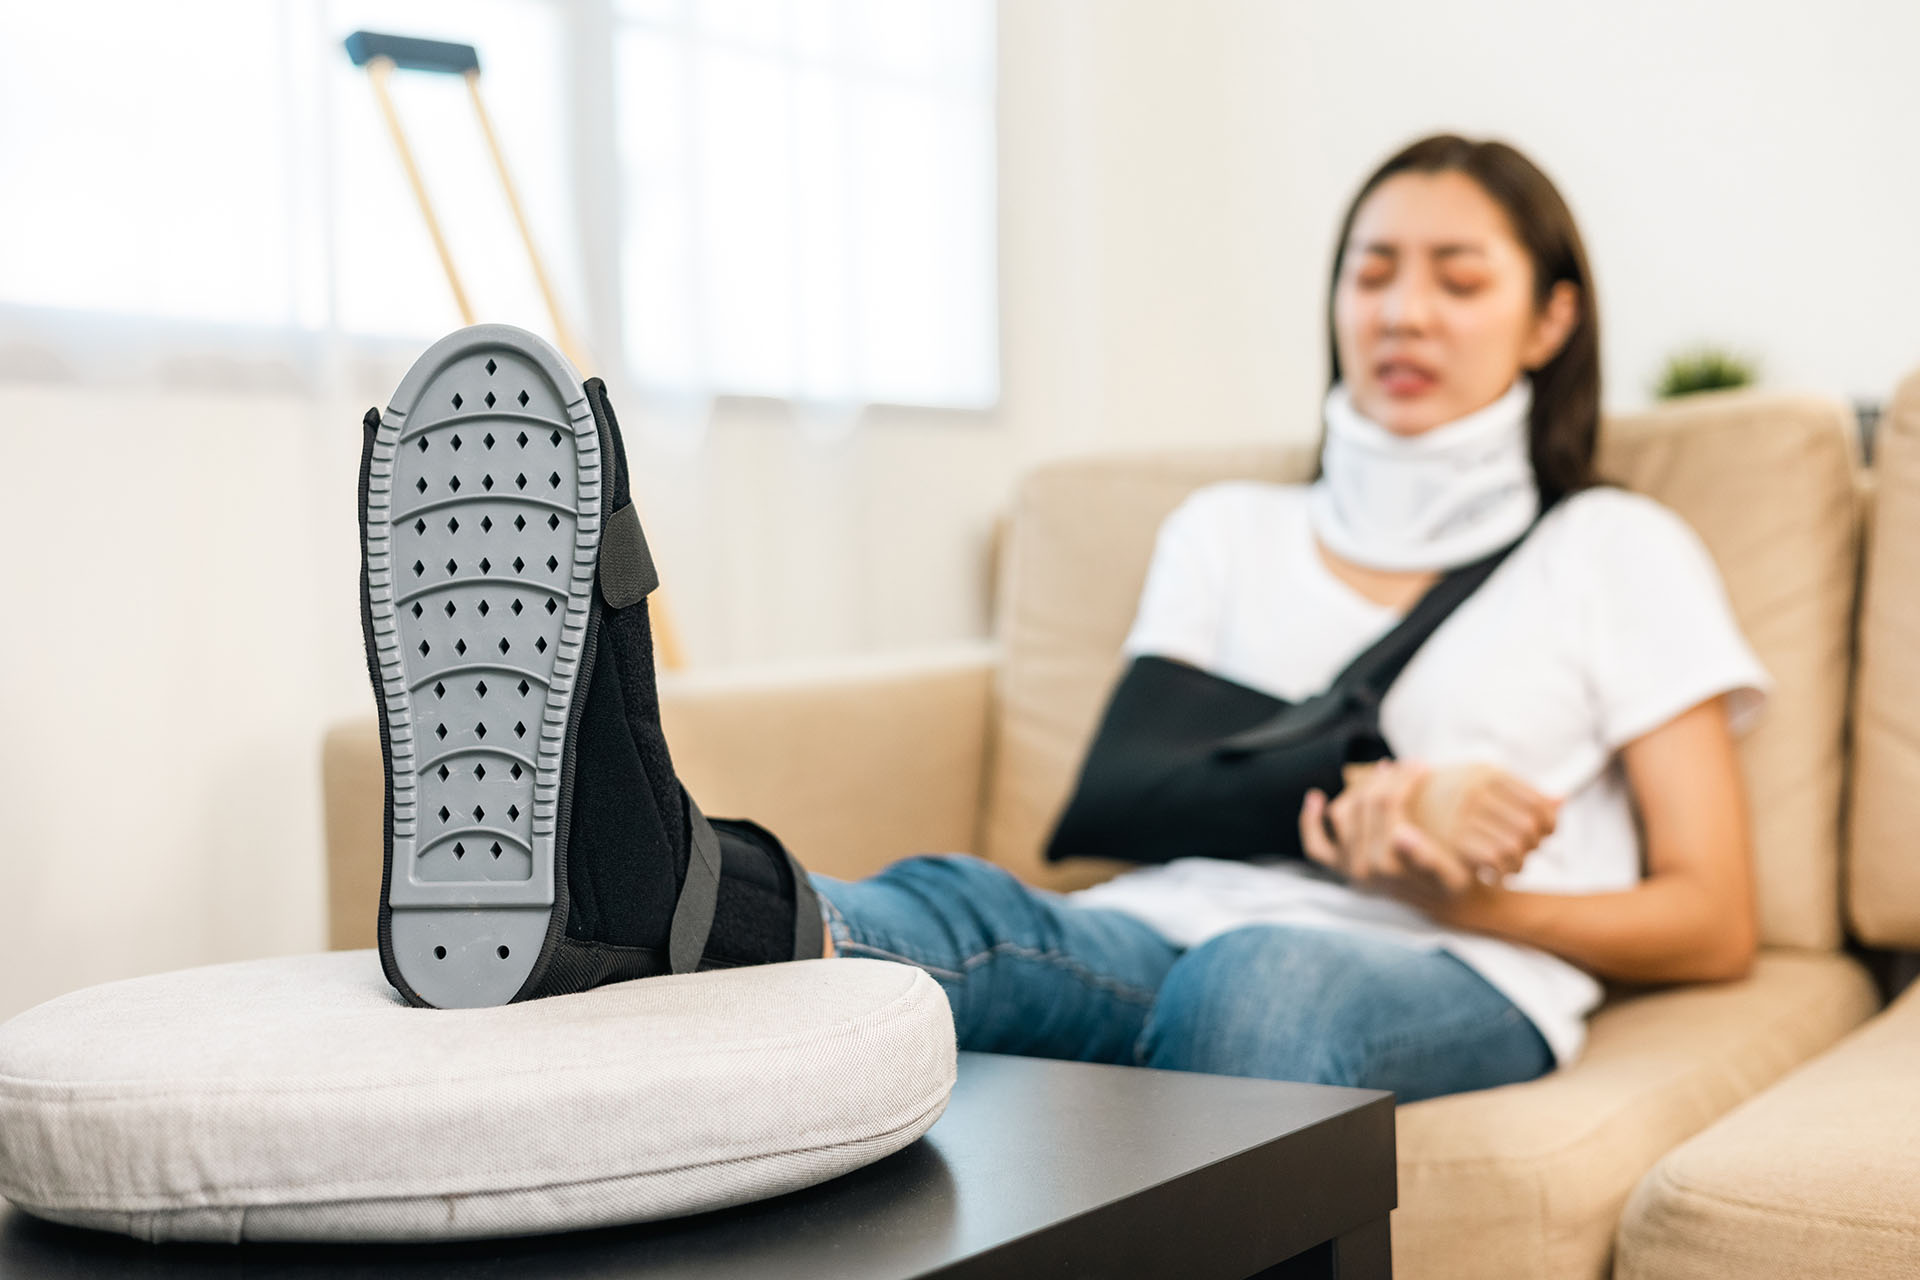 Woman suffered pain from accident fracture broken bone injury with leg splints in cast neck splints collar arm splints sling support arm in living room.